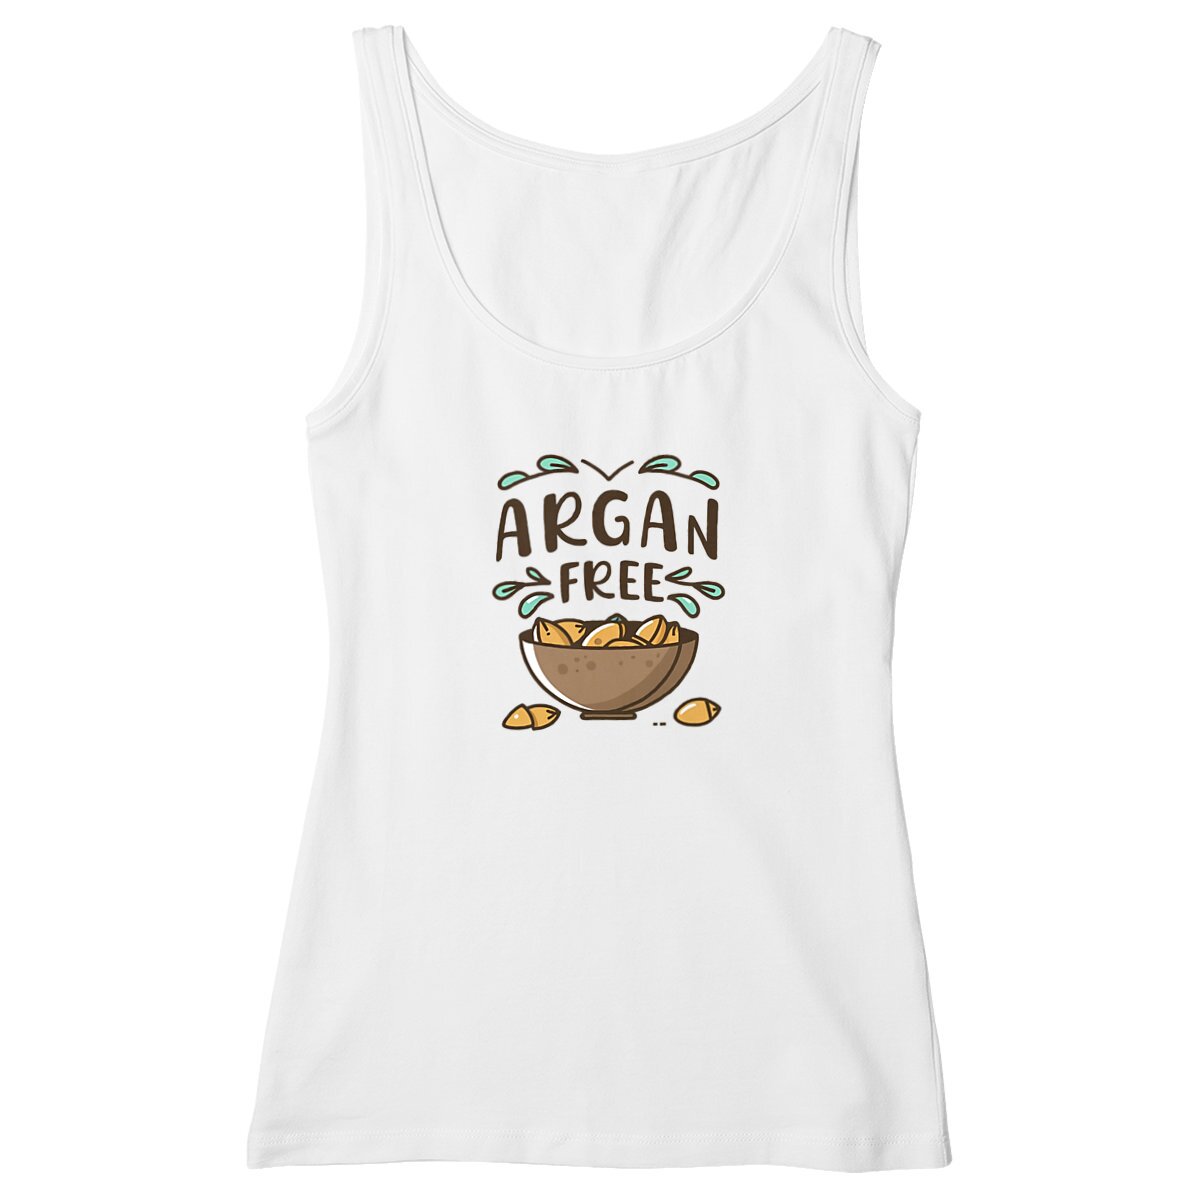 Argan Free Organic Cotton Graphic Tank Top | Hypoallergenic - Allergy Friendly - Naturally Free